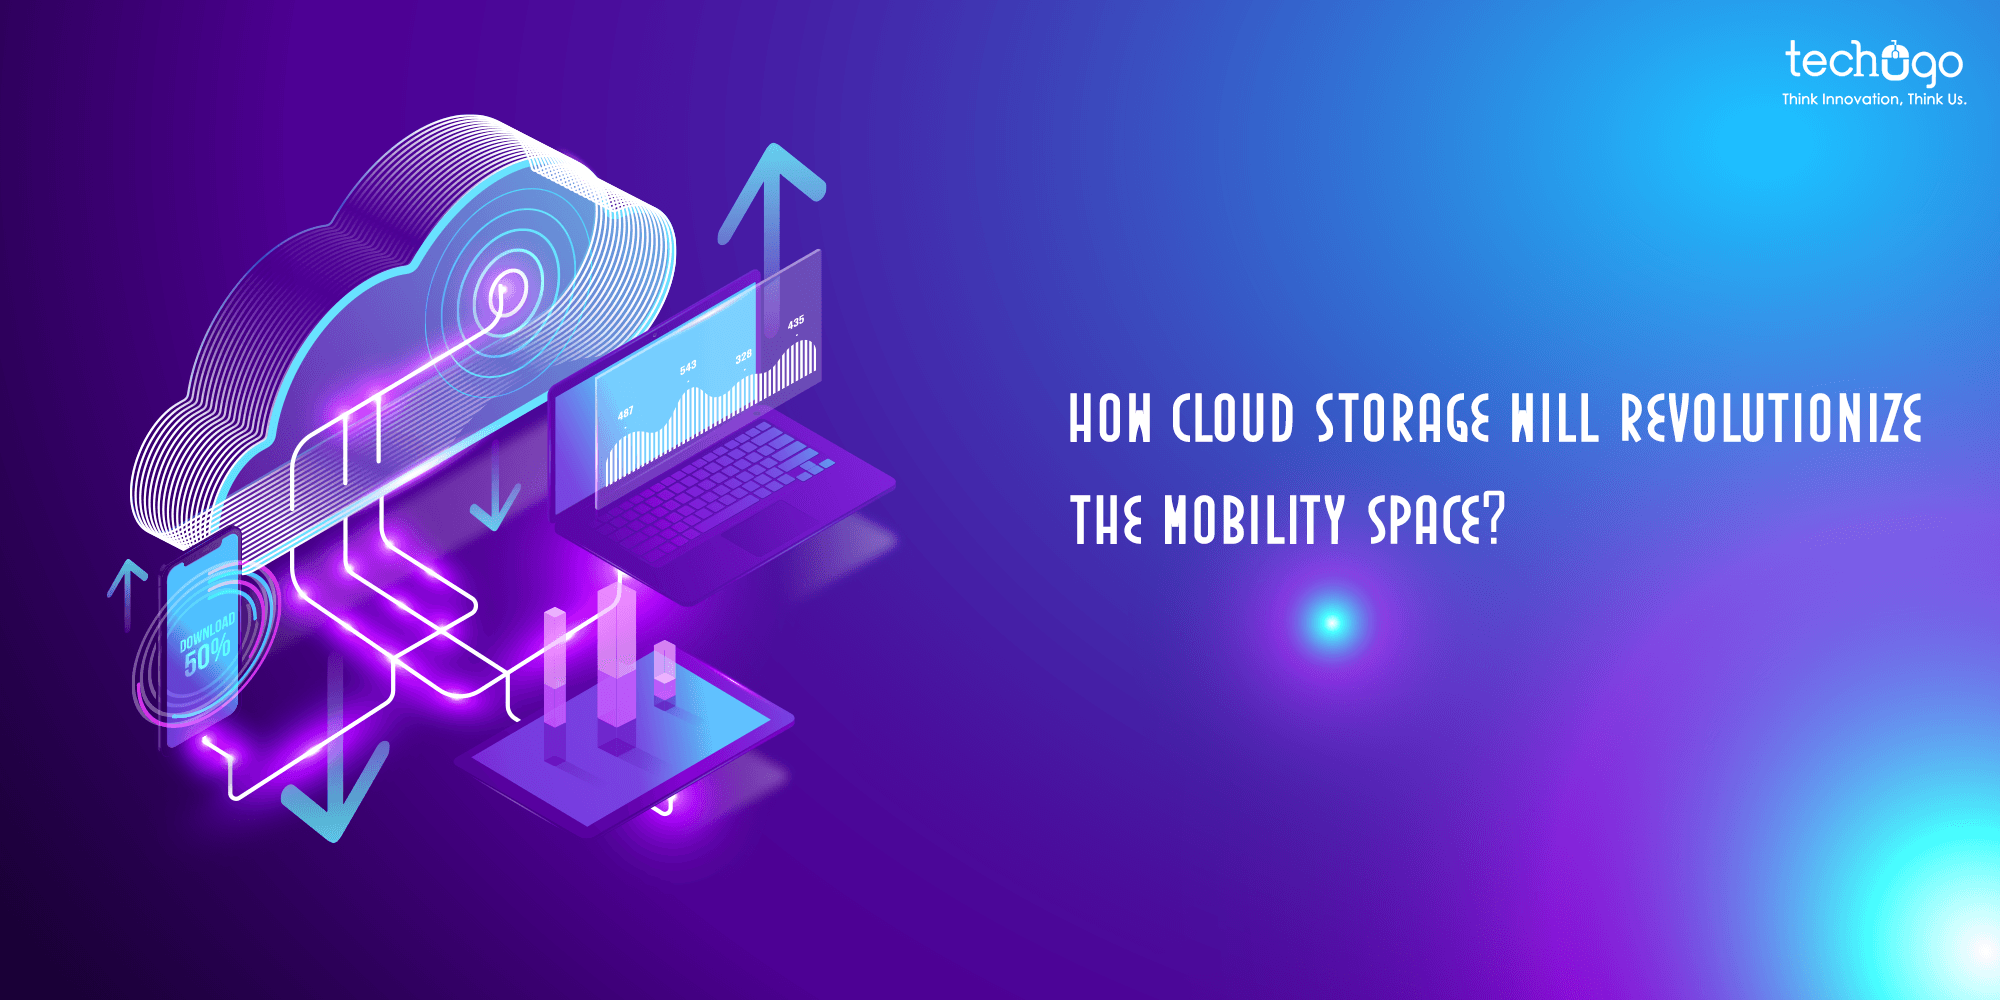 HOW CLOUD STORAGE WILL REVOLUTIONIZE THE MOBILITY SPACE?